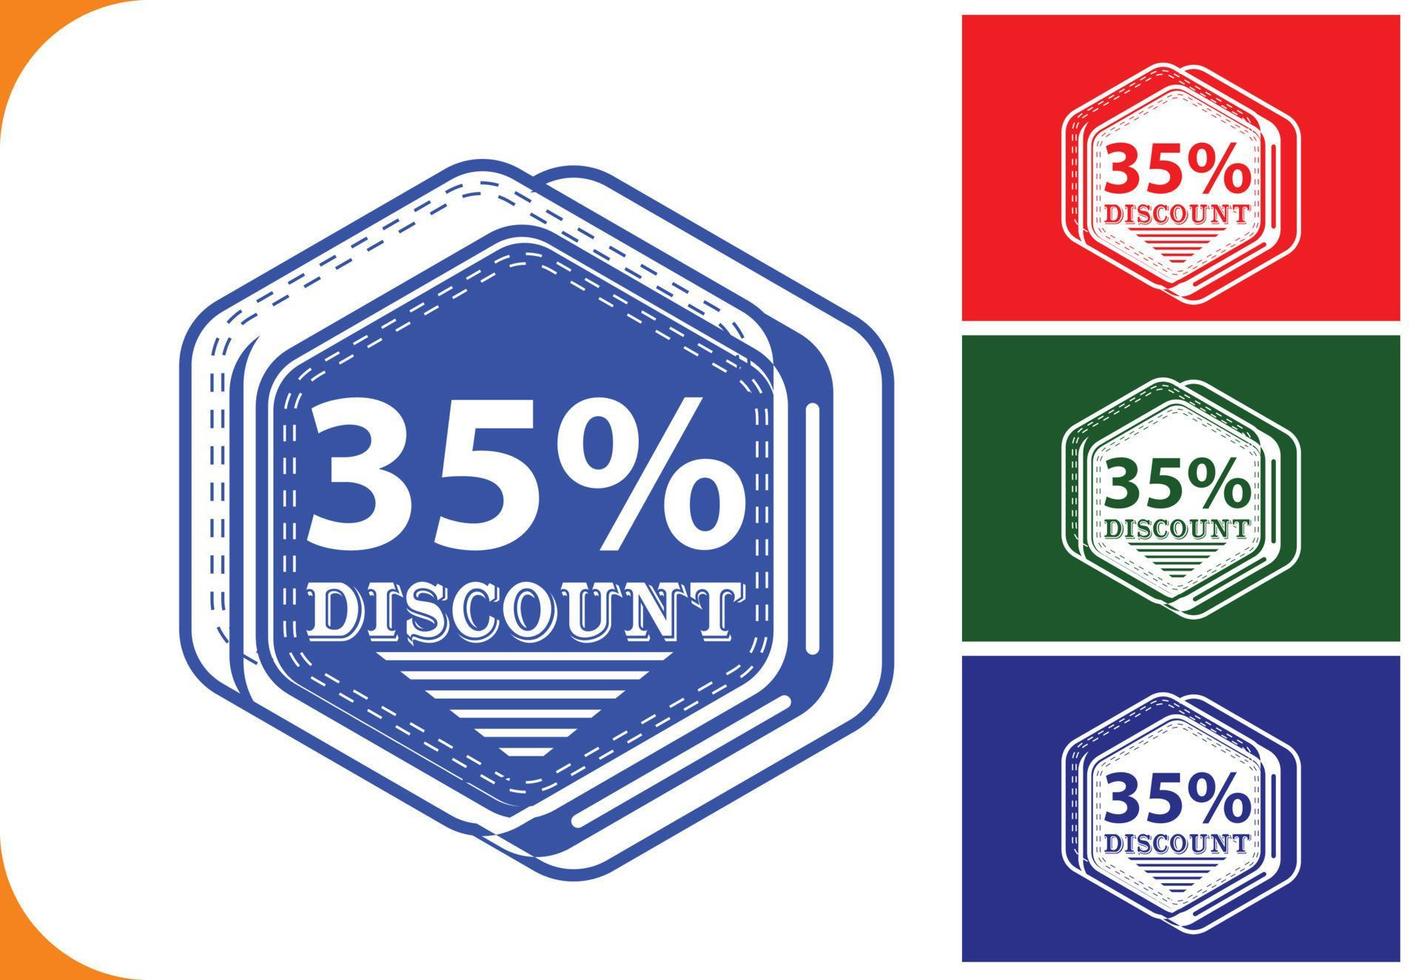 35 percent off new offer logo and icon design template vector